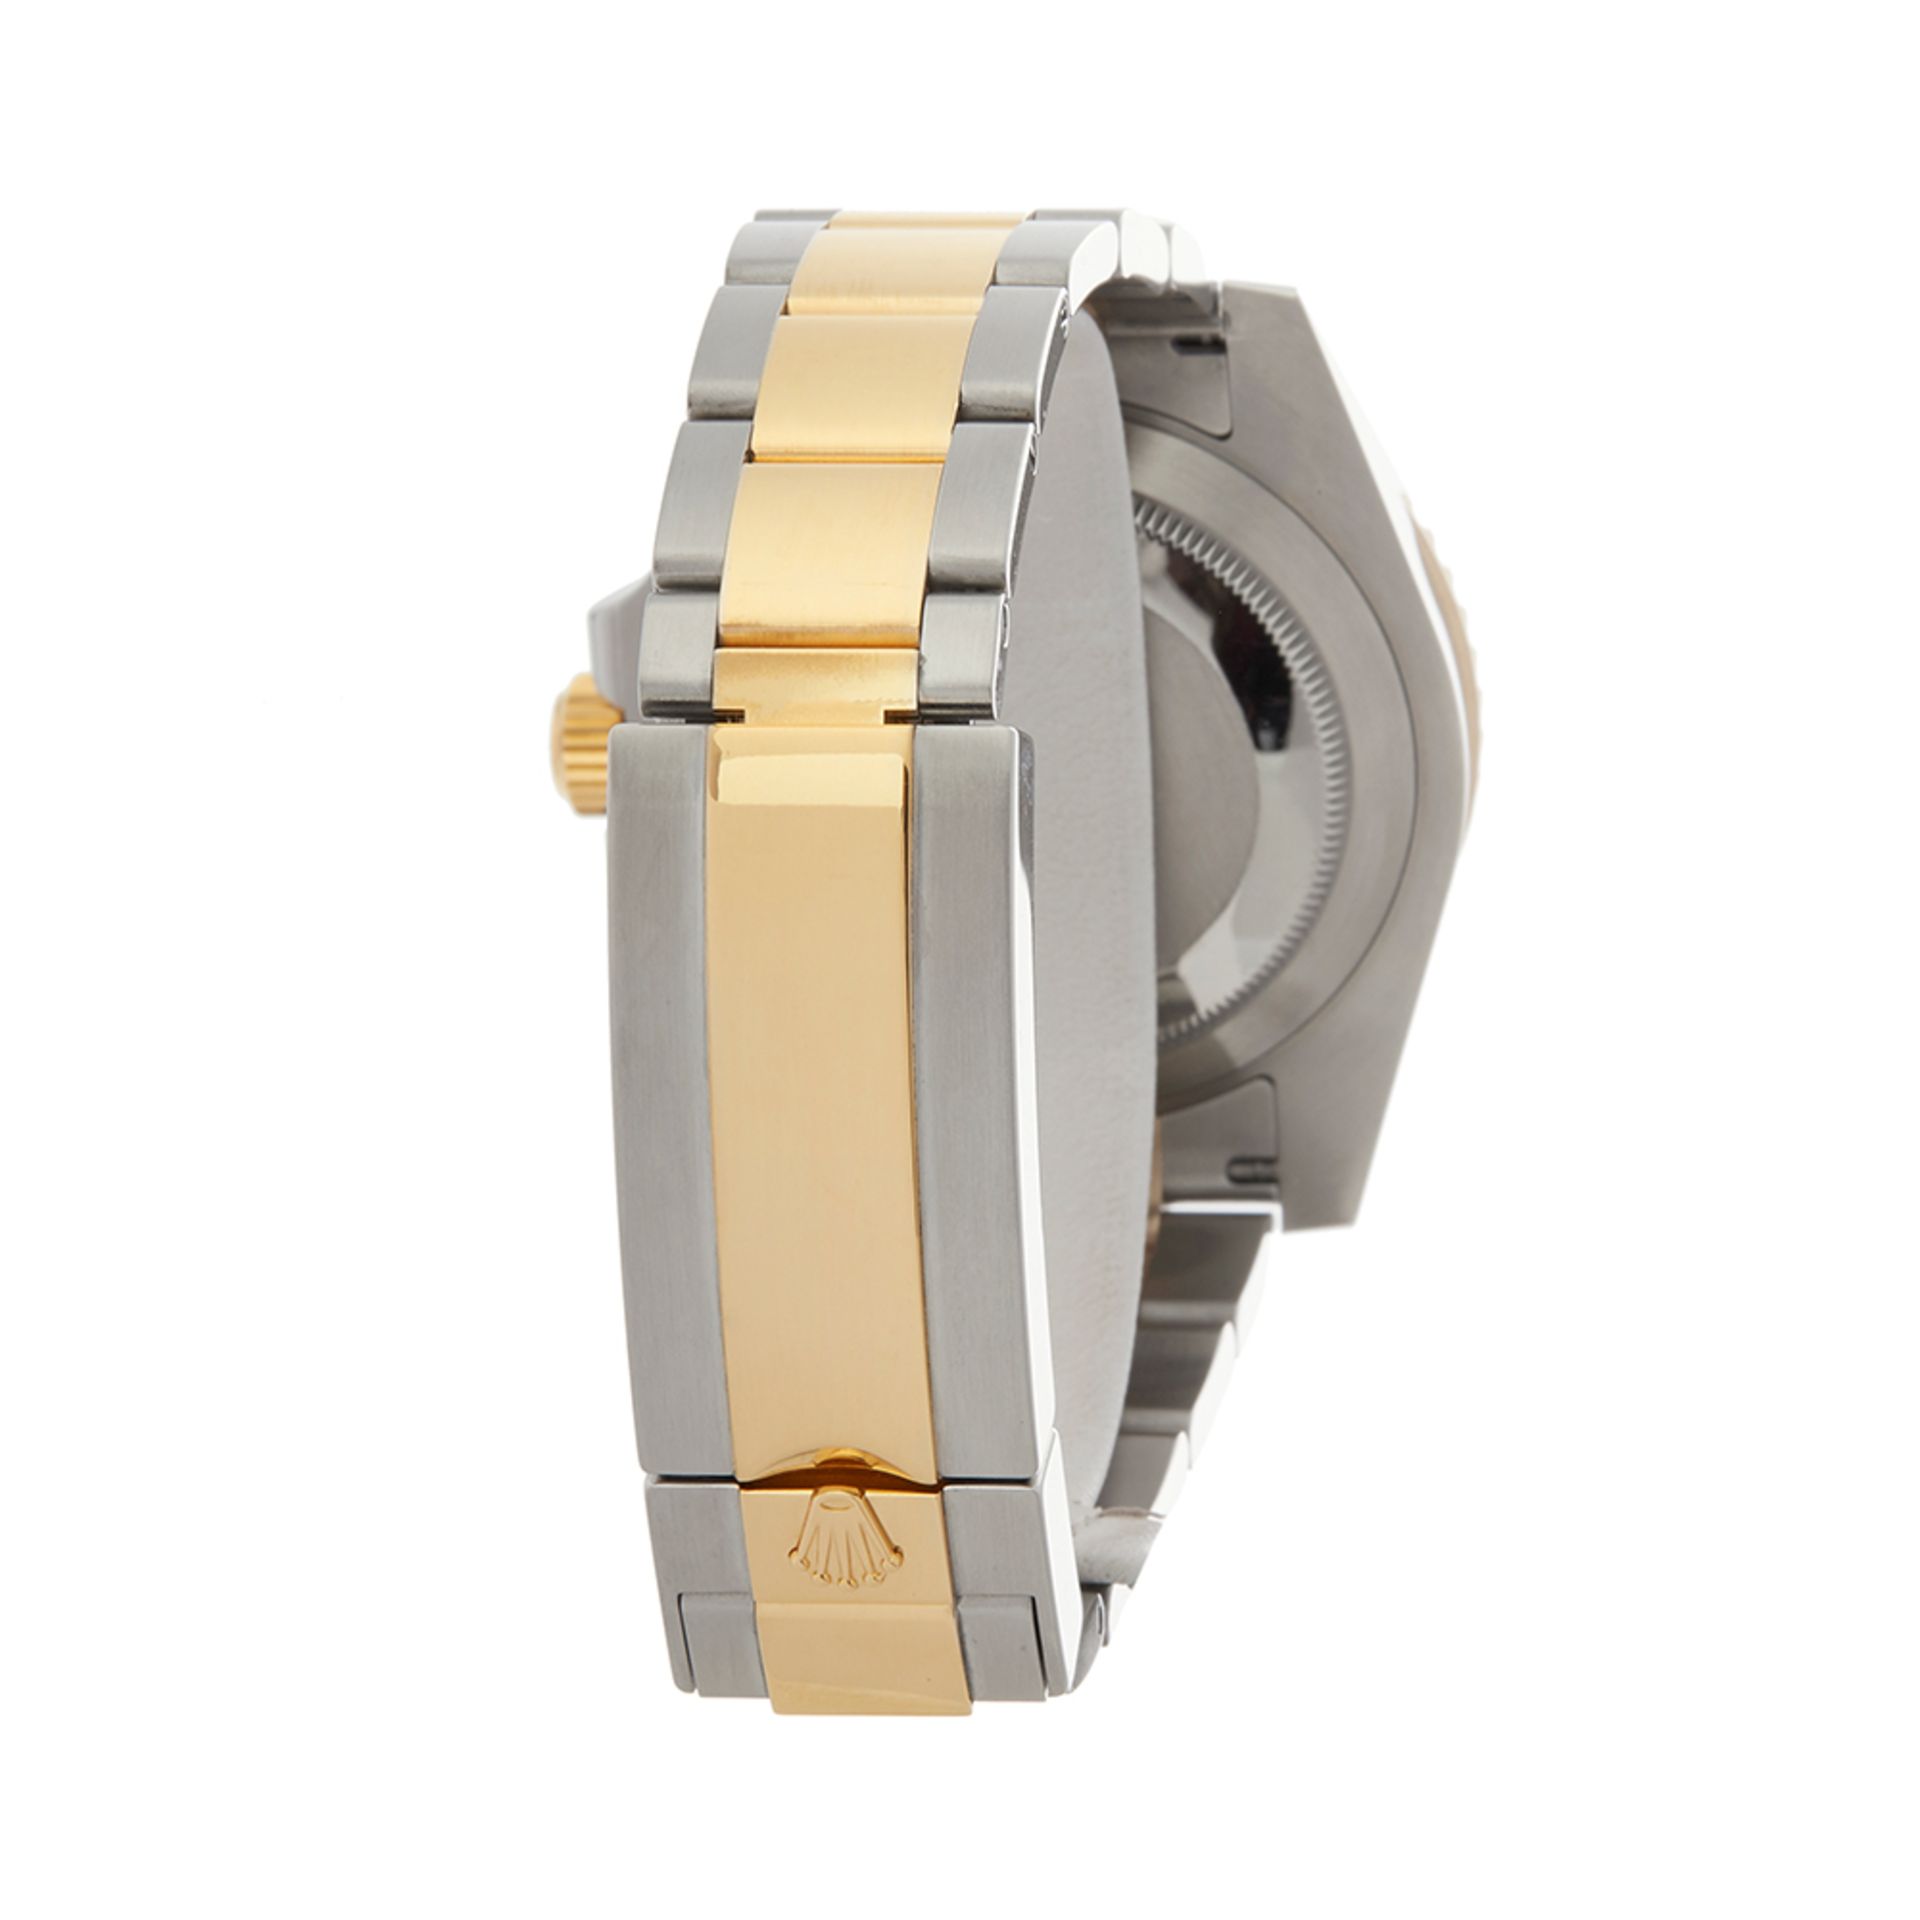 Submariner Stainless Steel & 18K Yellow Gold - 116613LB - Image 6 of 8